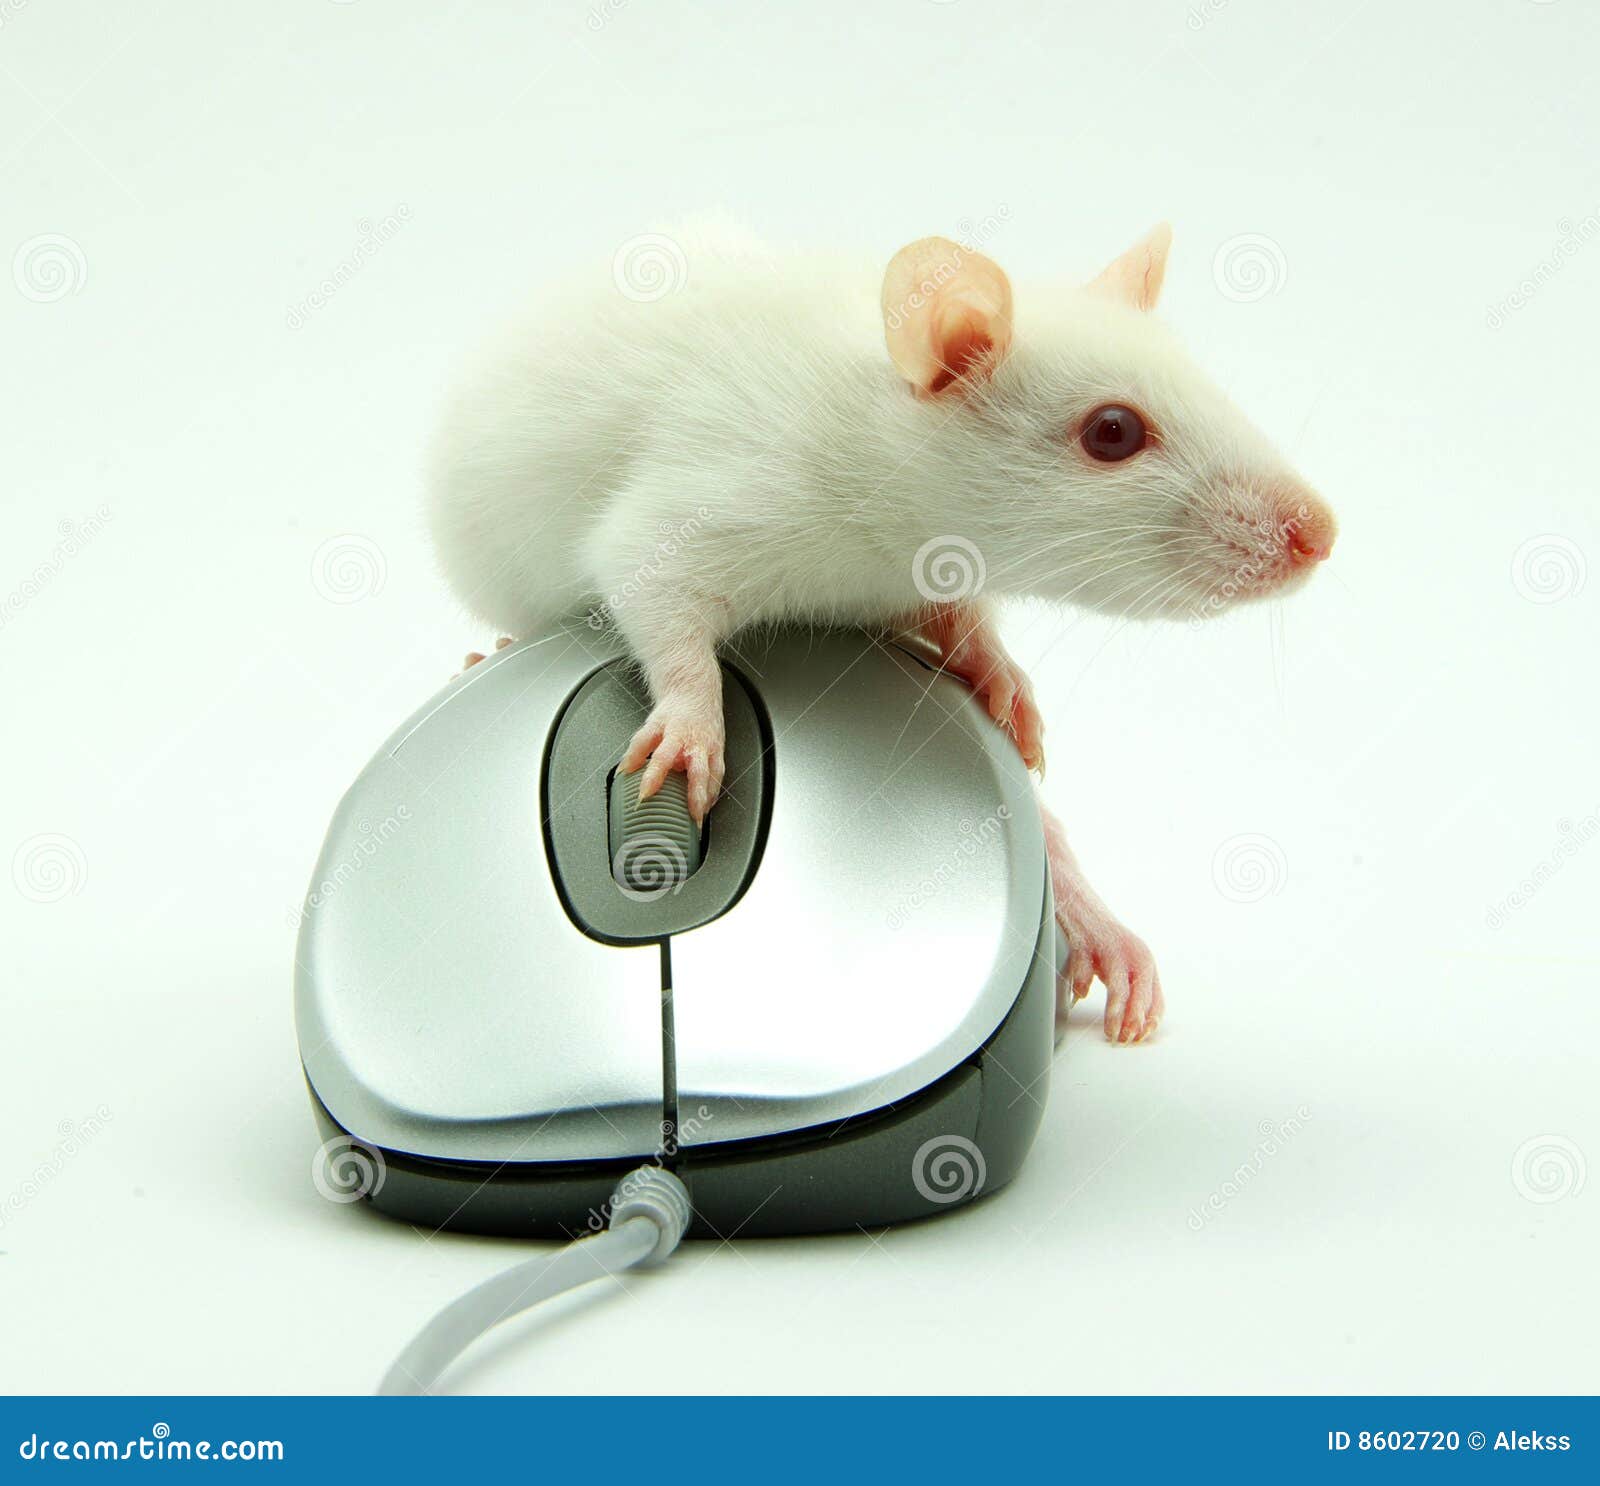 Rat On Computer Mouse Stock Photo - Image: 8602720